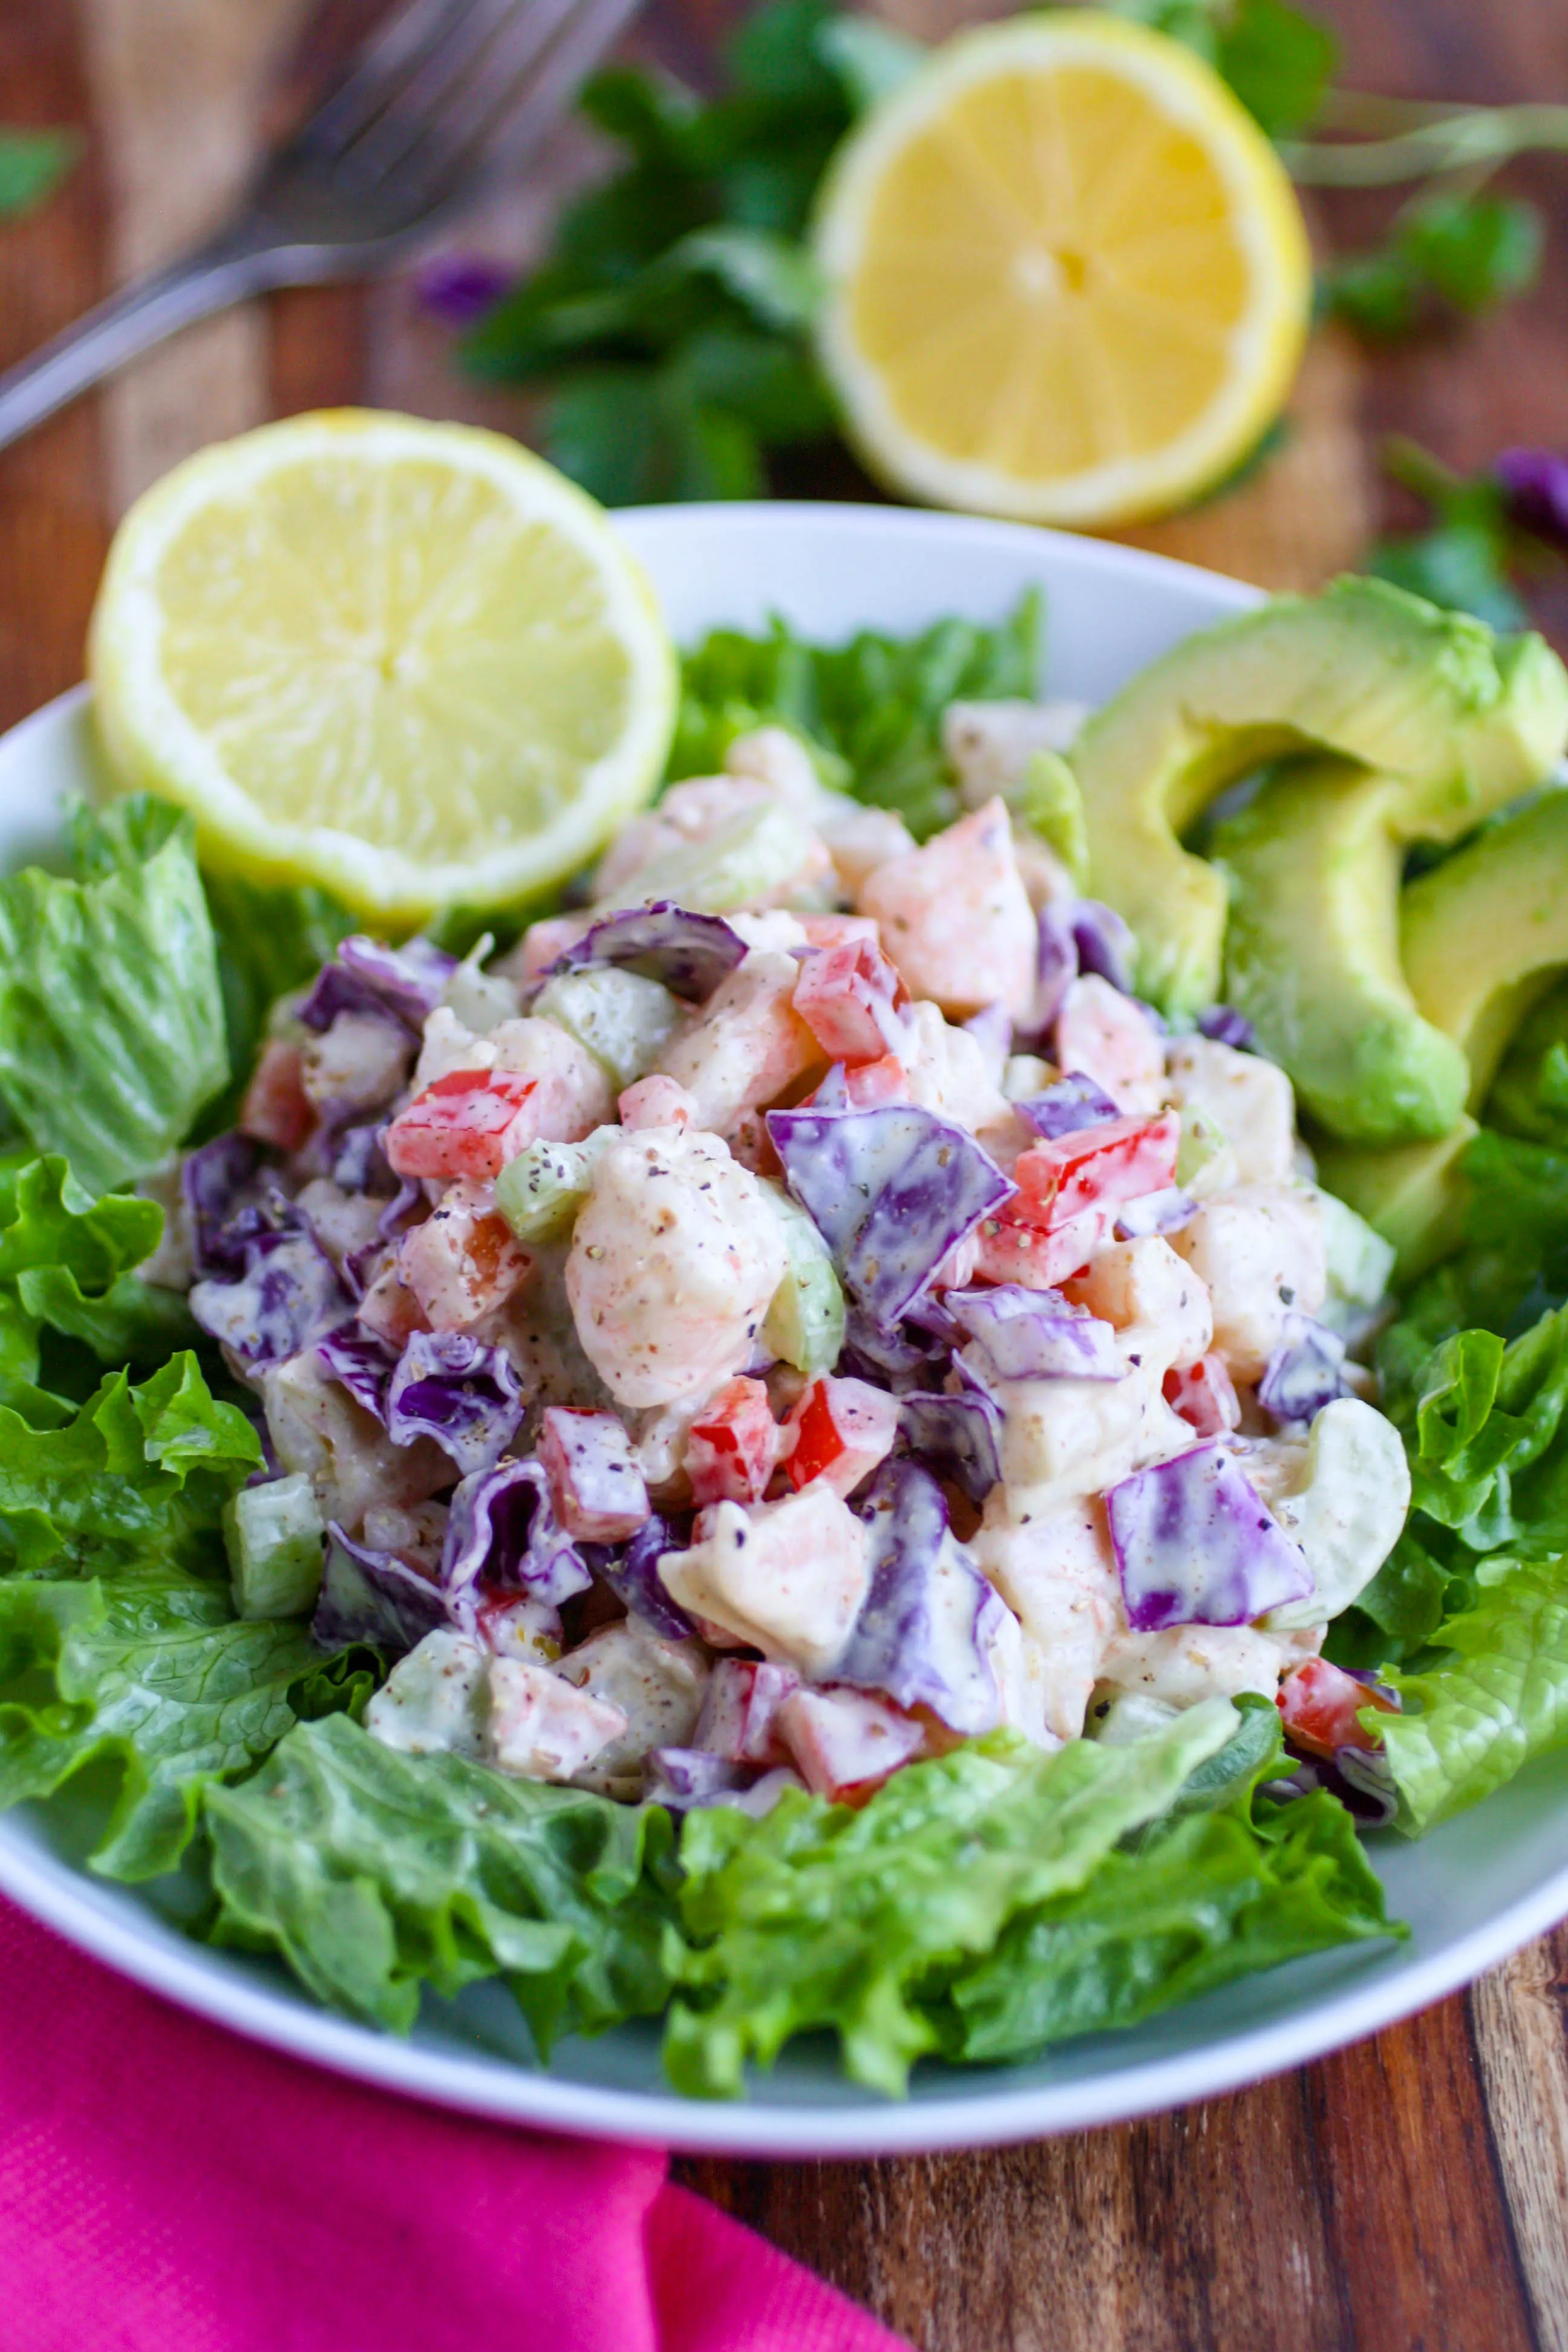 Chopped Shrimp Remoulade Salad is vibrant and tasty. Chopped Shrimp Remoulade Salad is a great dish to serve this winter!